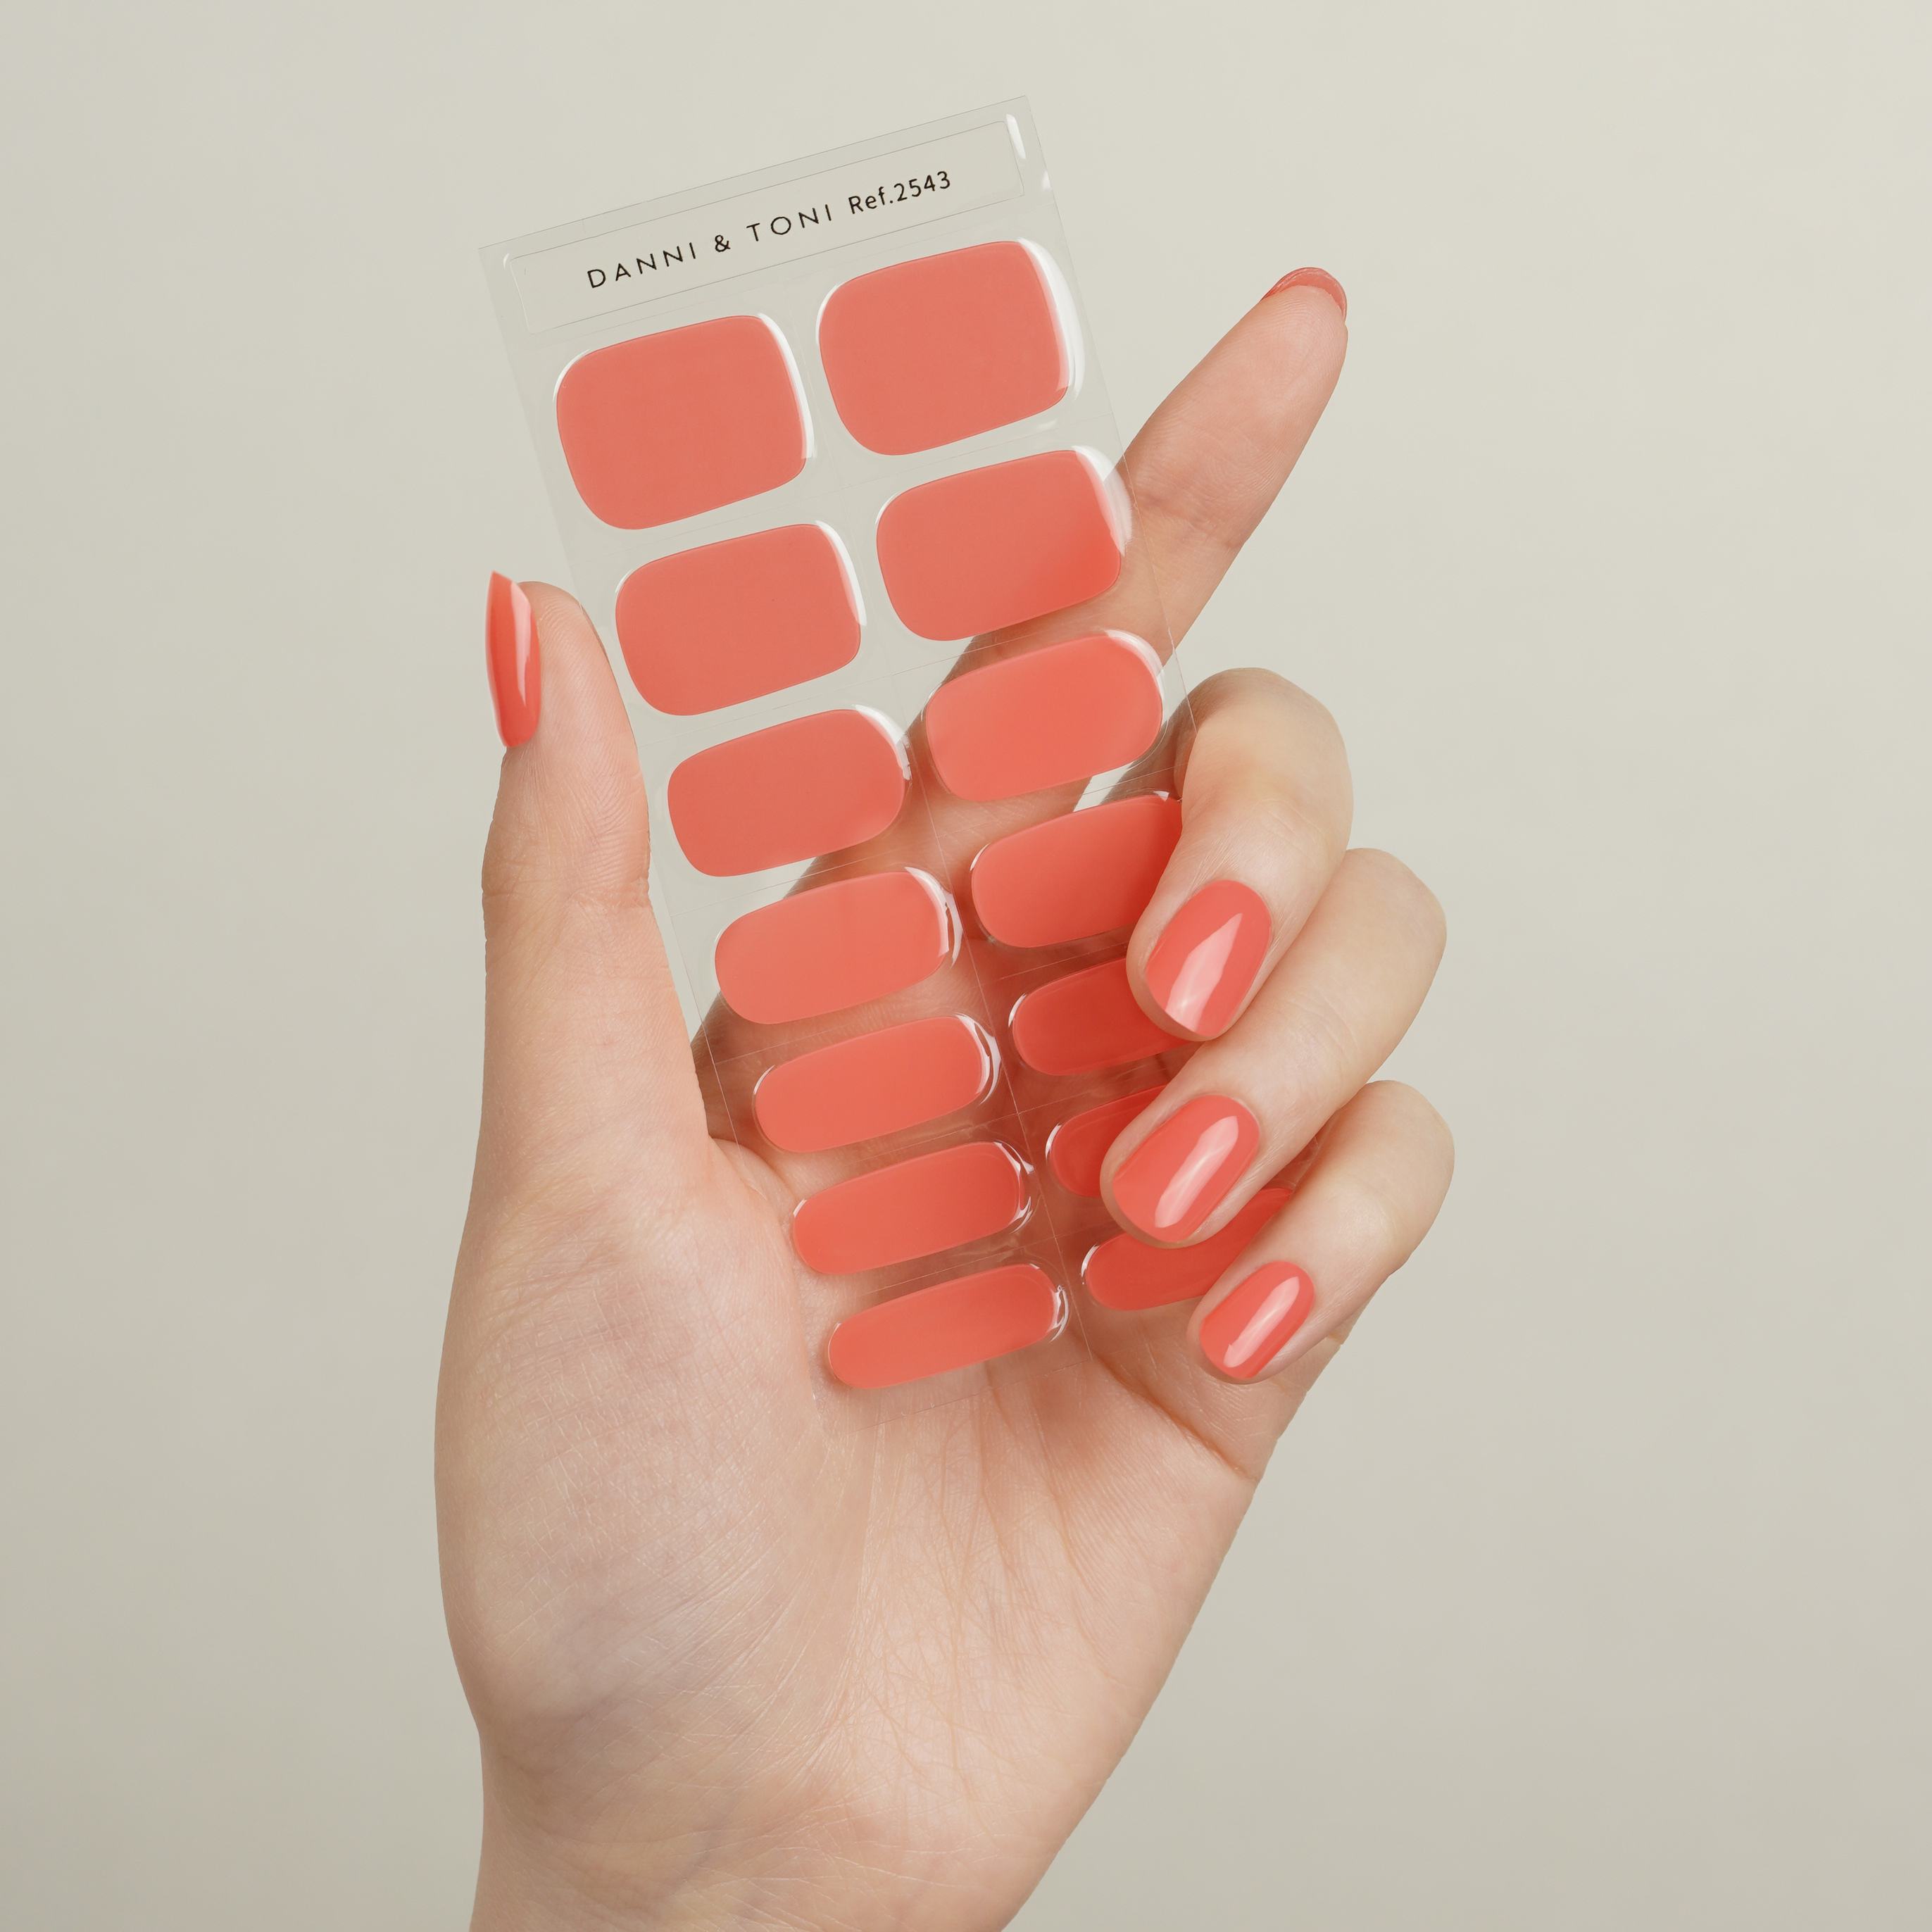 Coral Pink Semi-Cured Gel Nail Strips | Coral Delight - 2543